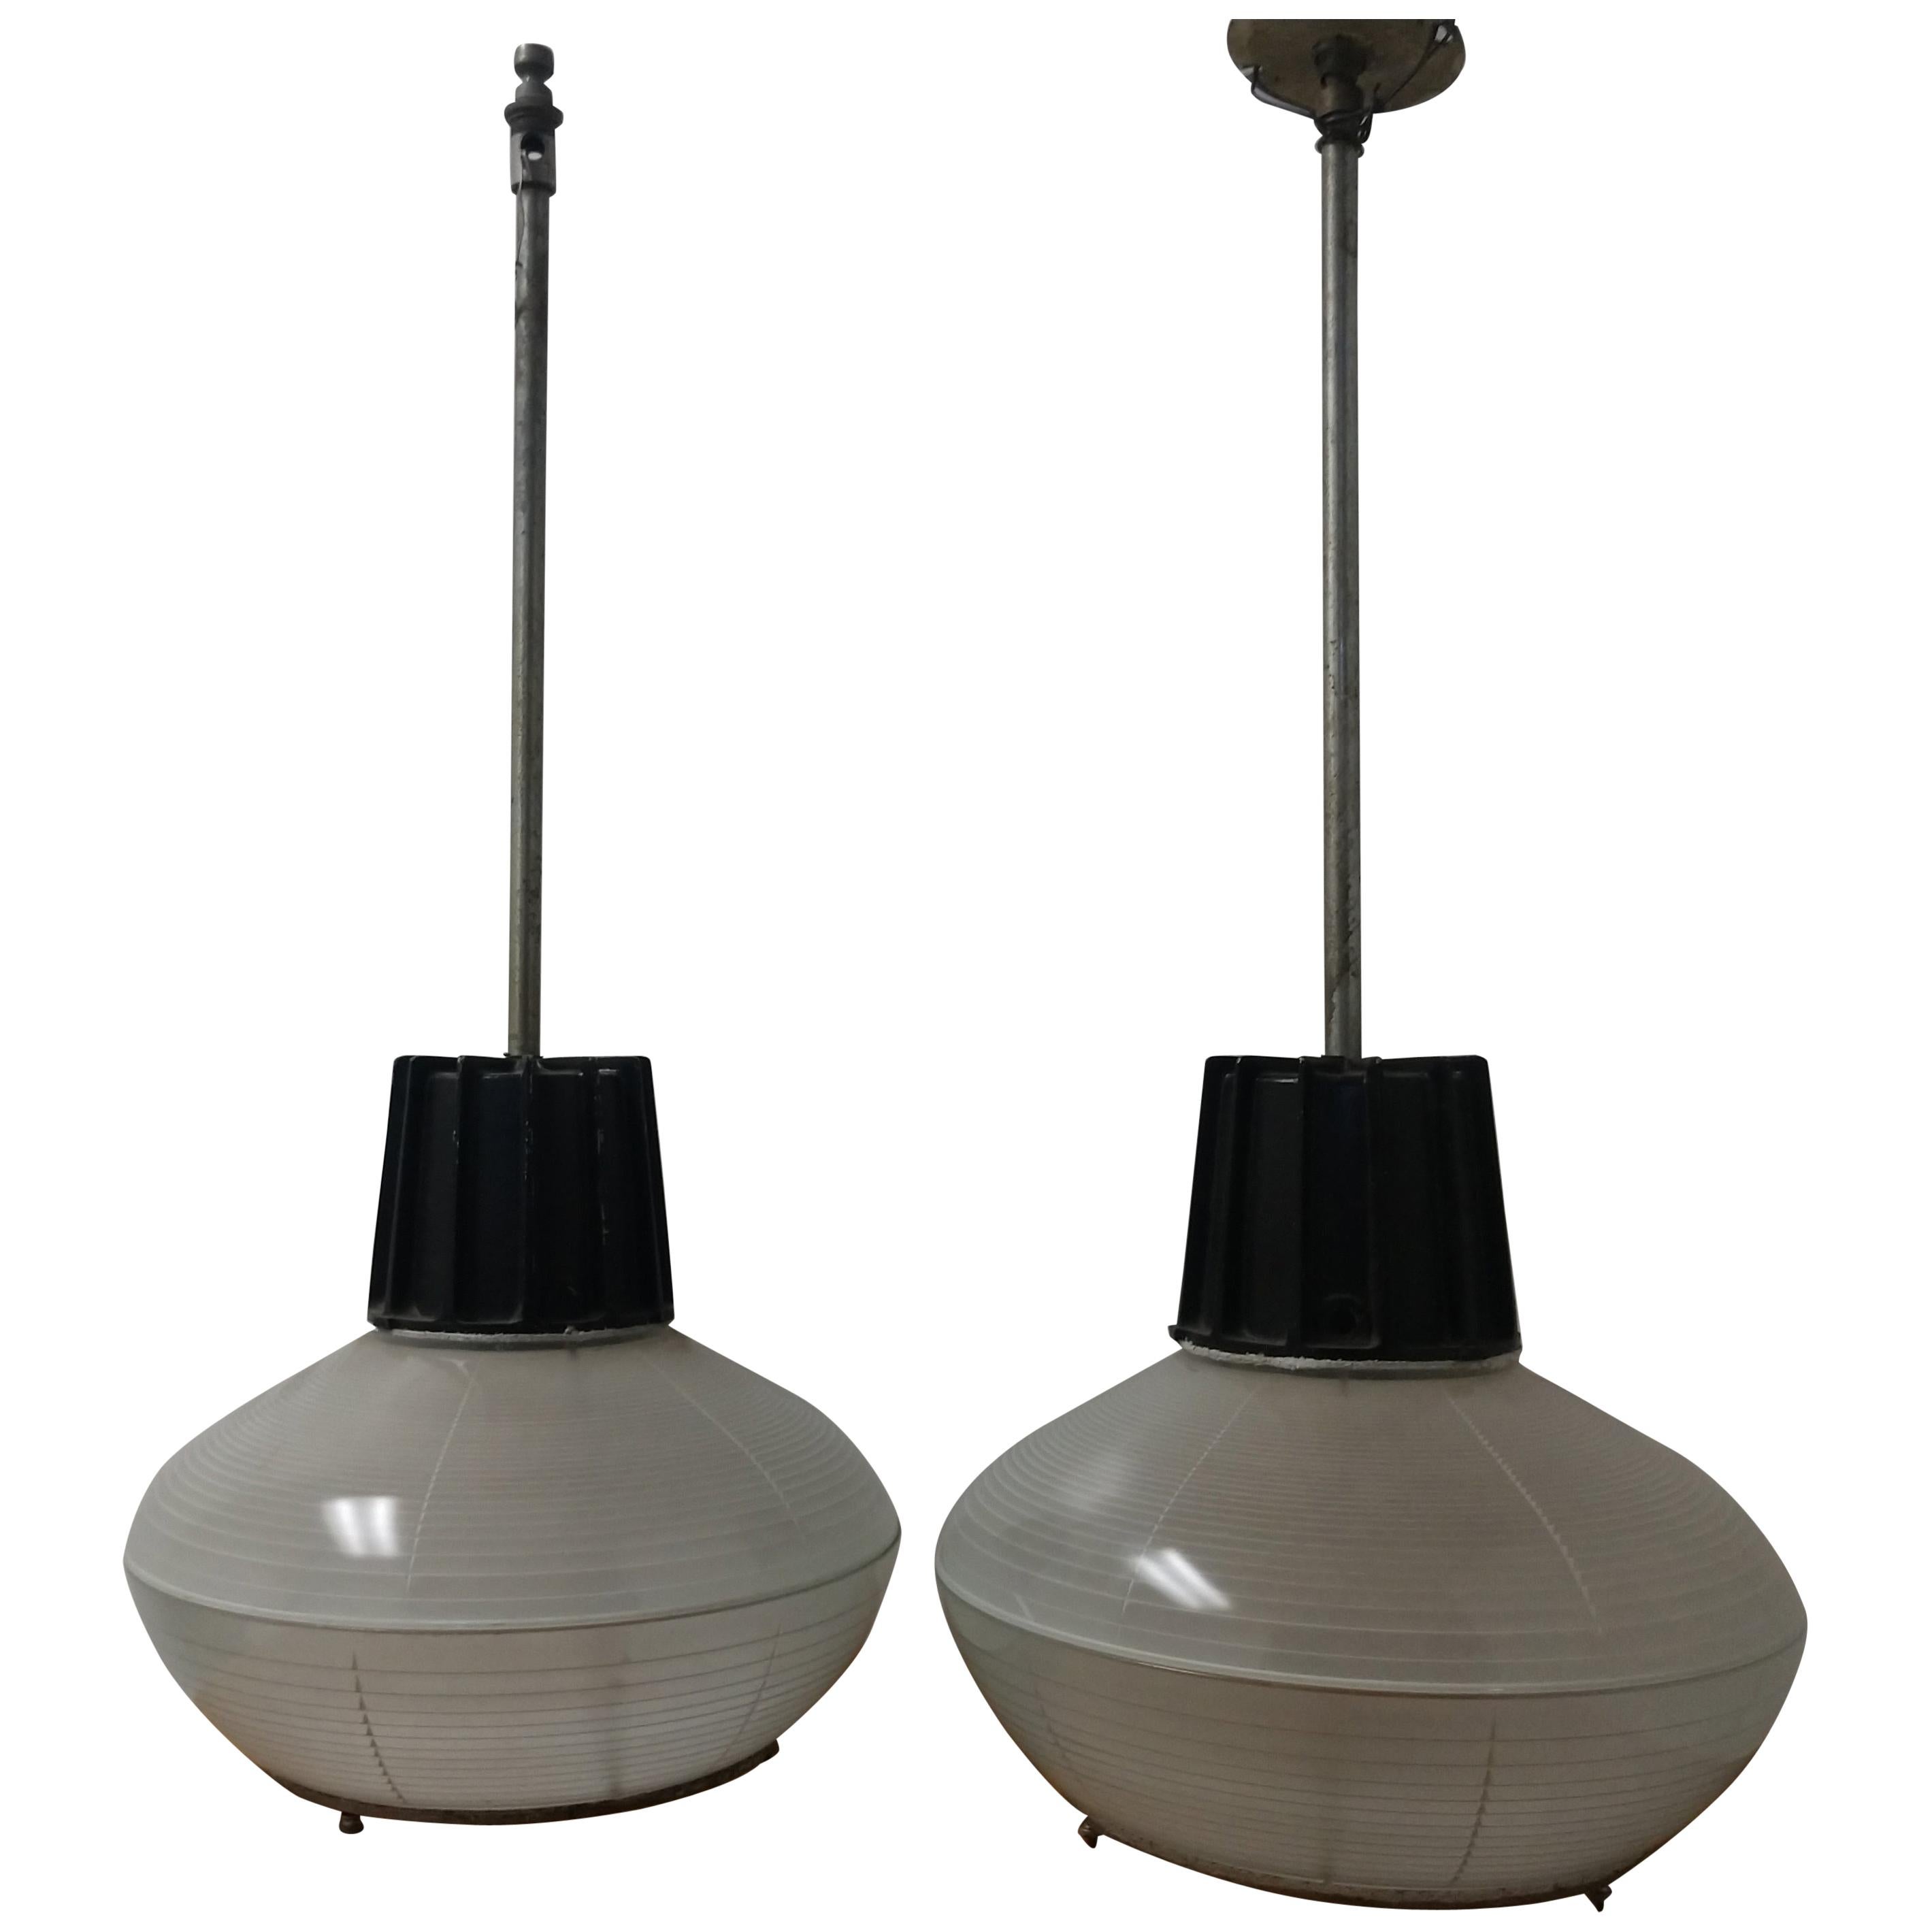 Pressed Pair of Mid-Century Modern C1955 Holophane Industrial Lamps For Sale